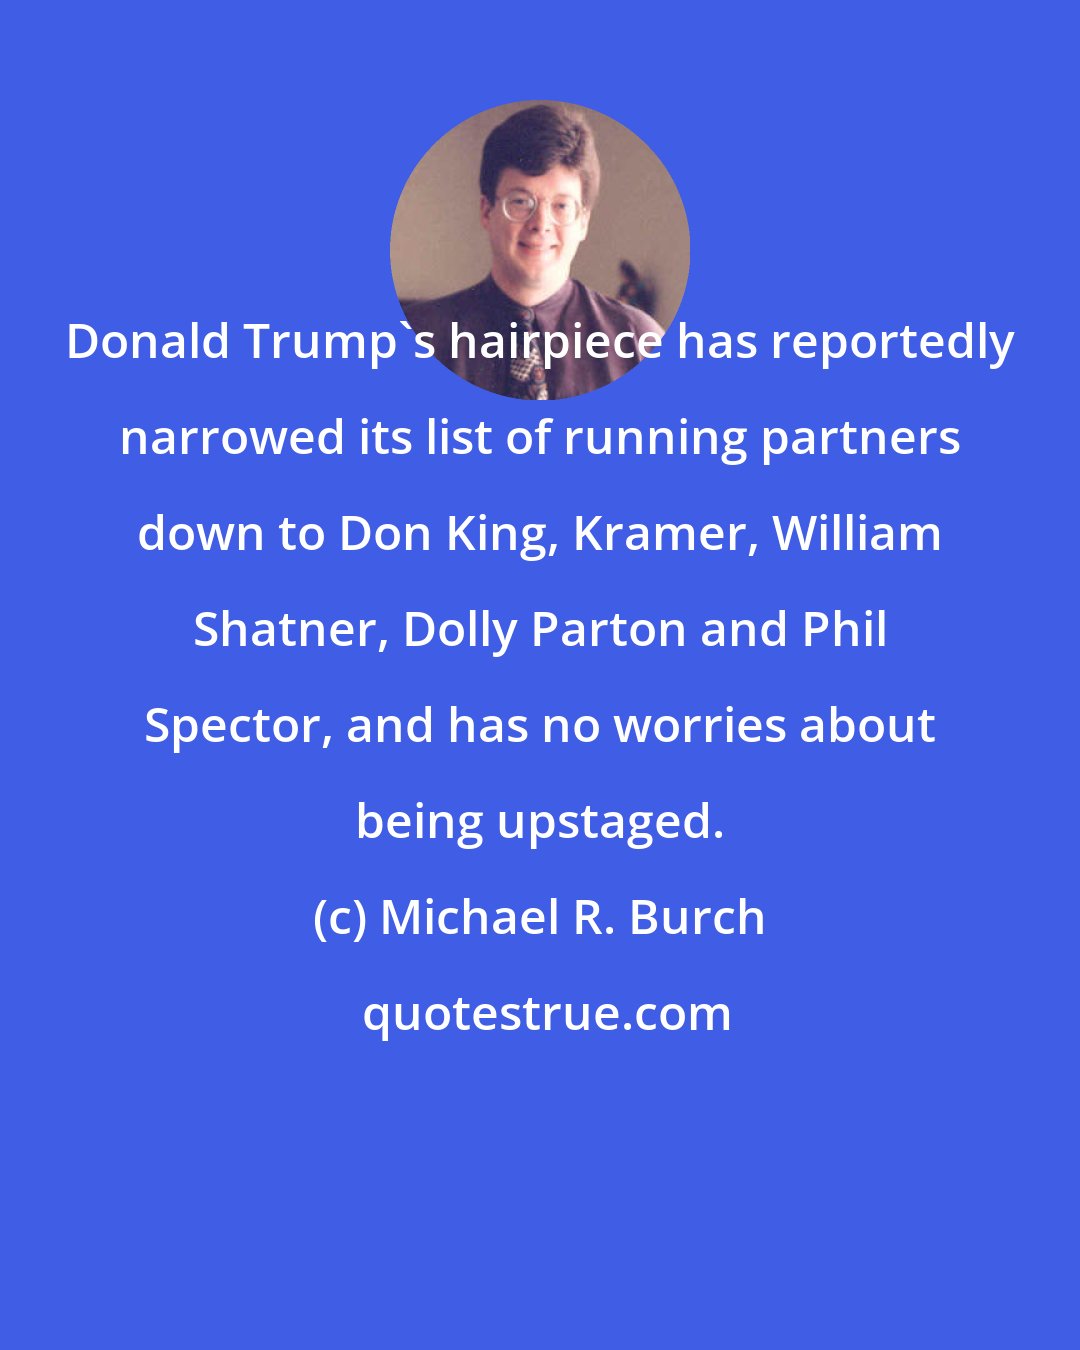 Michael R. Burch: Donald Trump's hairpiece has reportedly narrowed its list of running partners down to Don King, Kramer, William Shatner, Dolly Parton and Phil Spector, and has no worries about being upstaged.